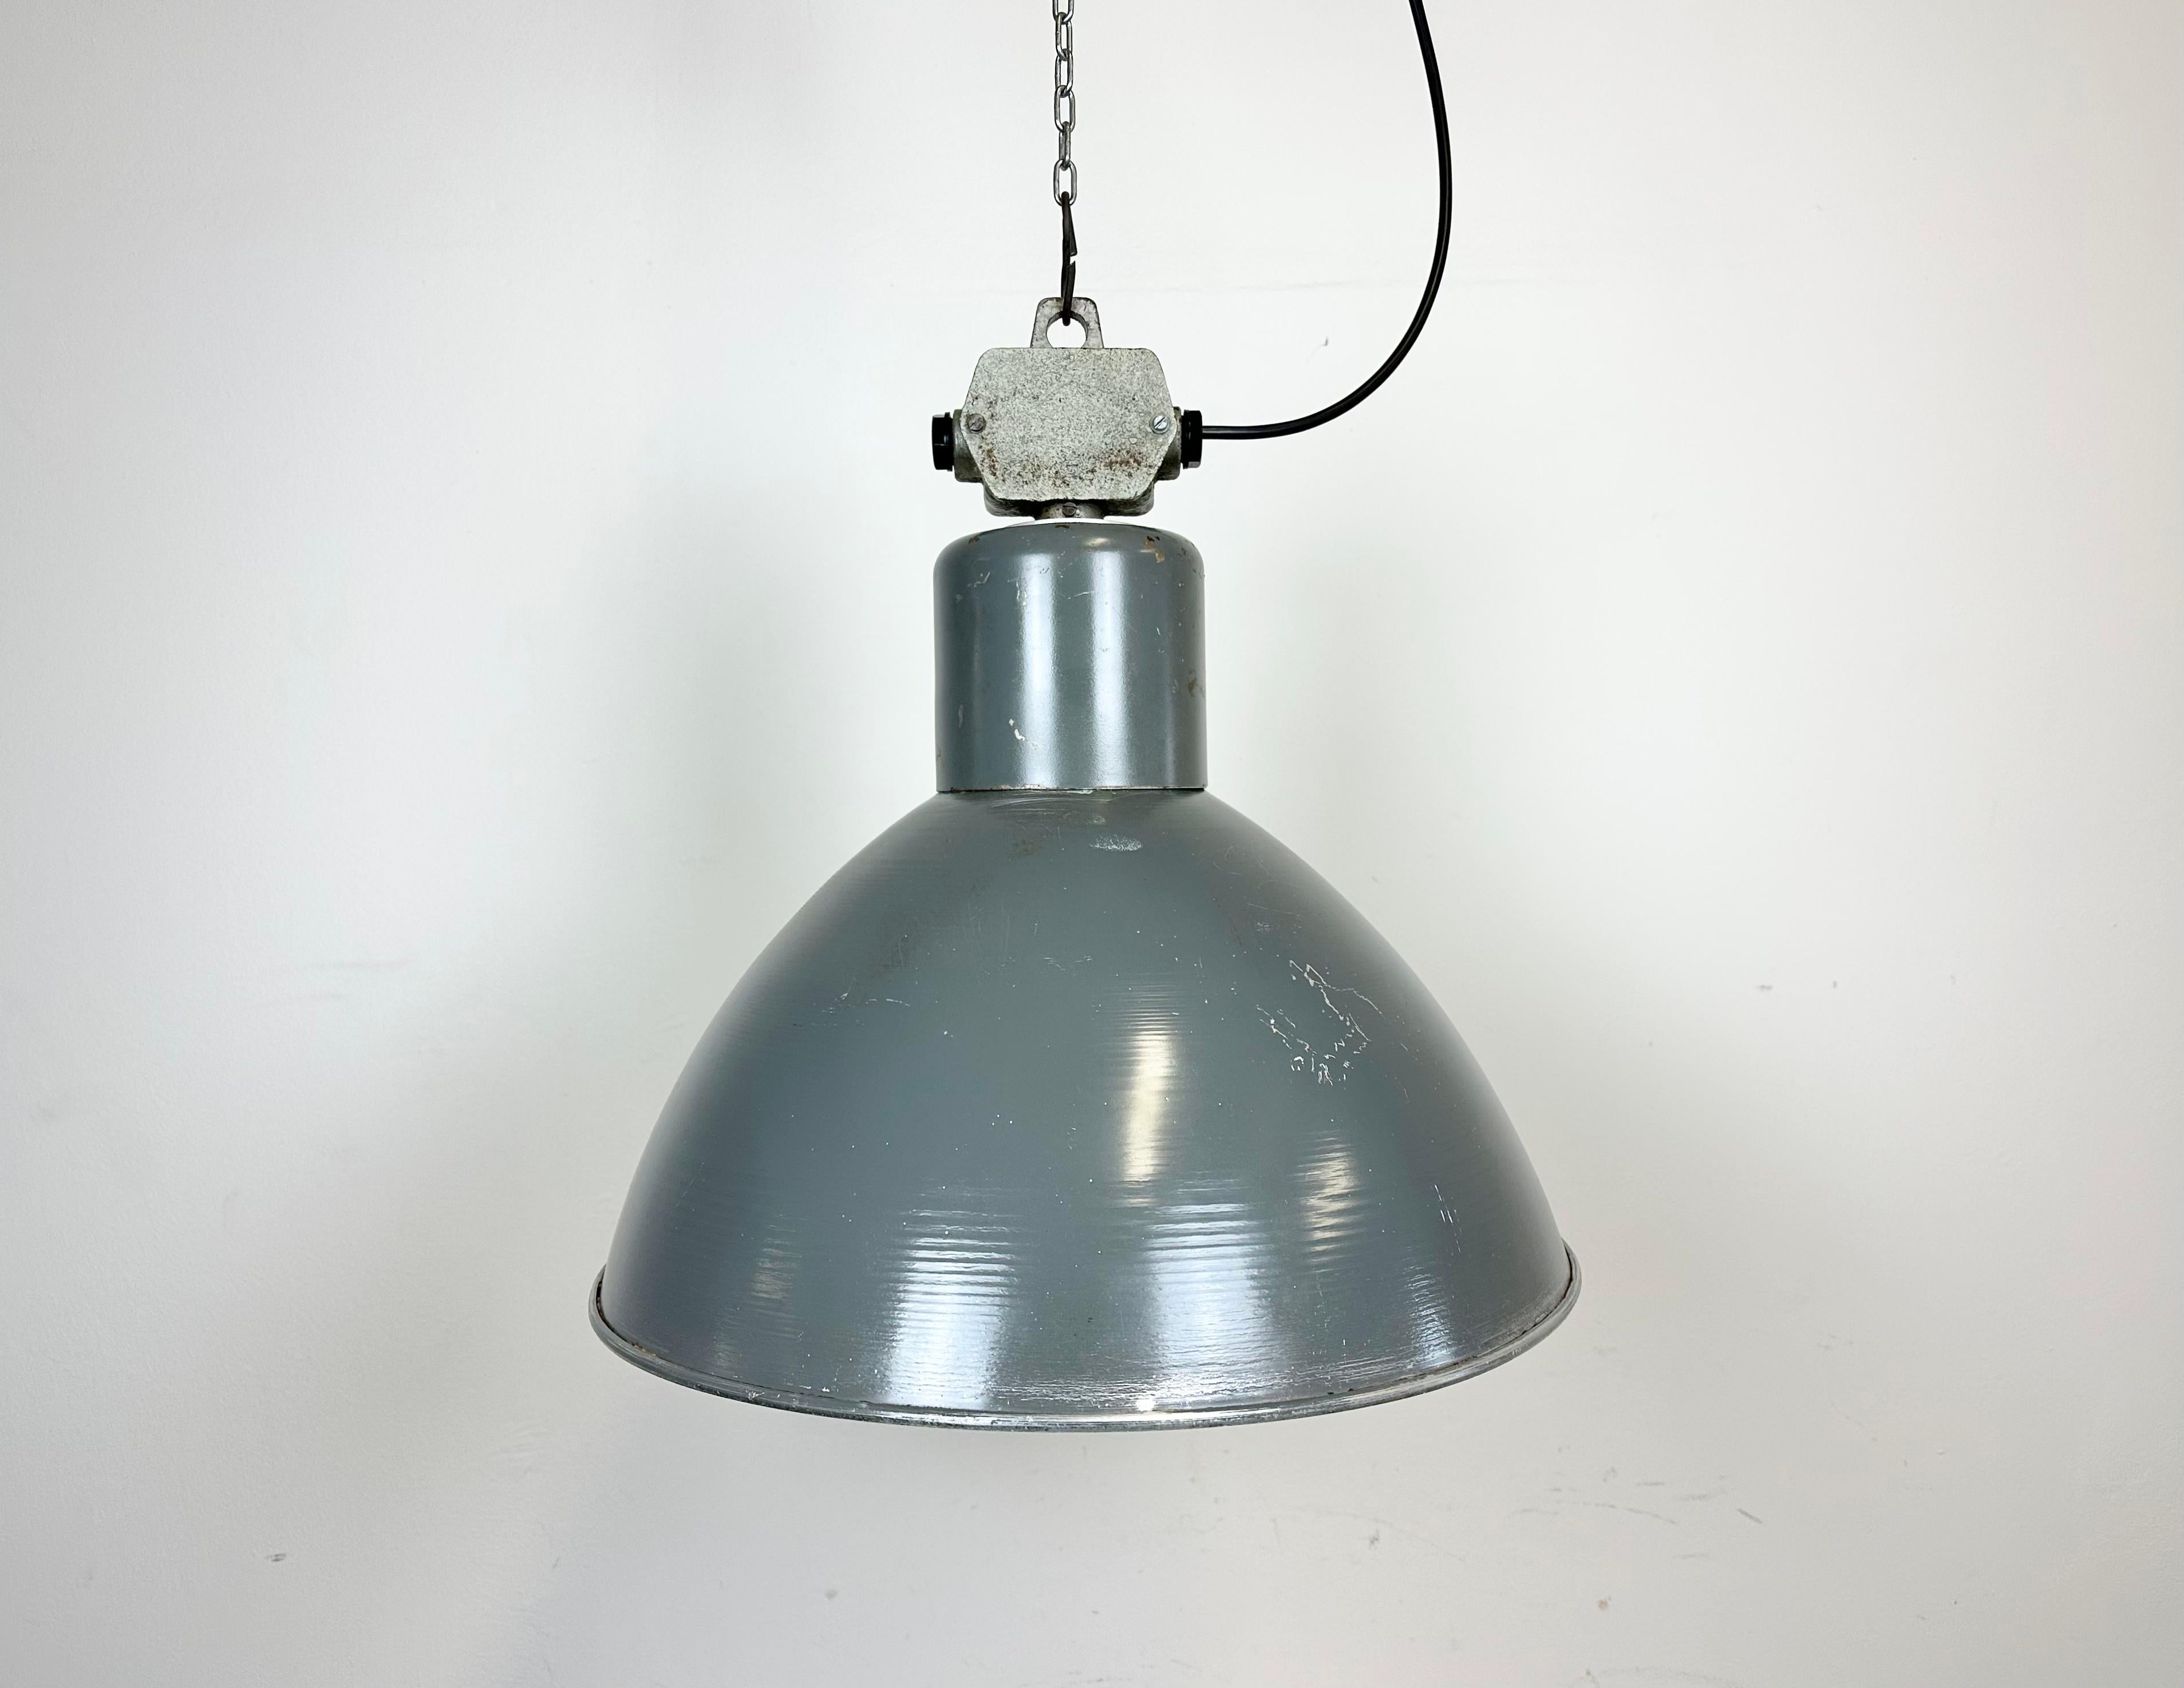 This industrial factory pendant lamp was made by Polam Wilkasy in Poland during the 1960s. It features a dark grey aluminium body and light grey cast aluminium top box. New porcelain socket requires E27/ E26 light bulbs. New wire. The piece weighs